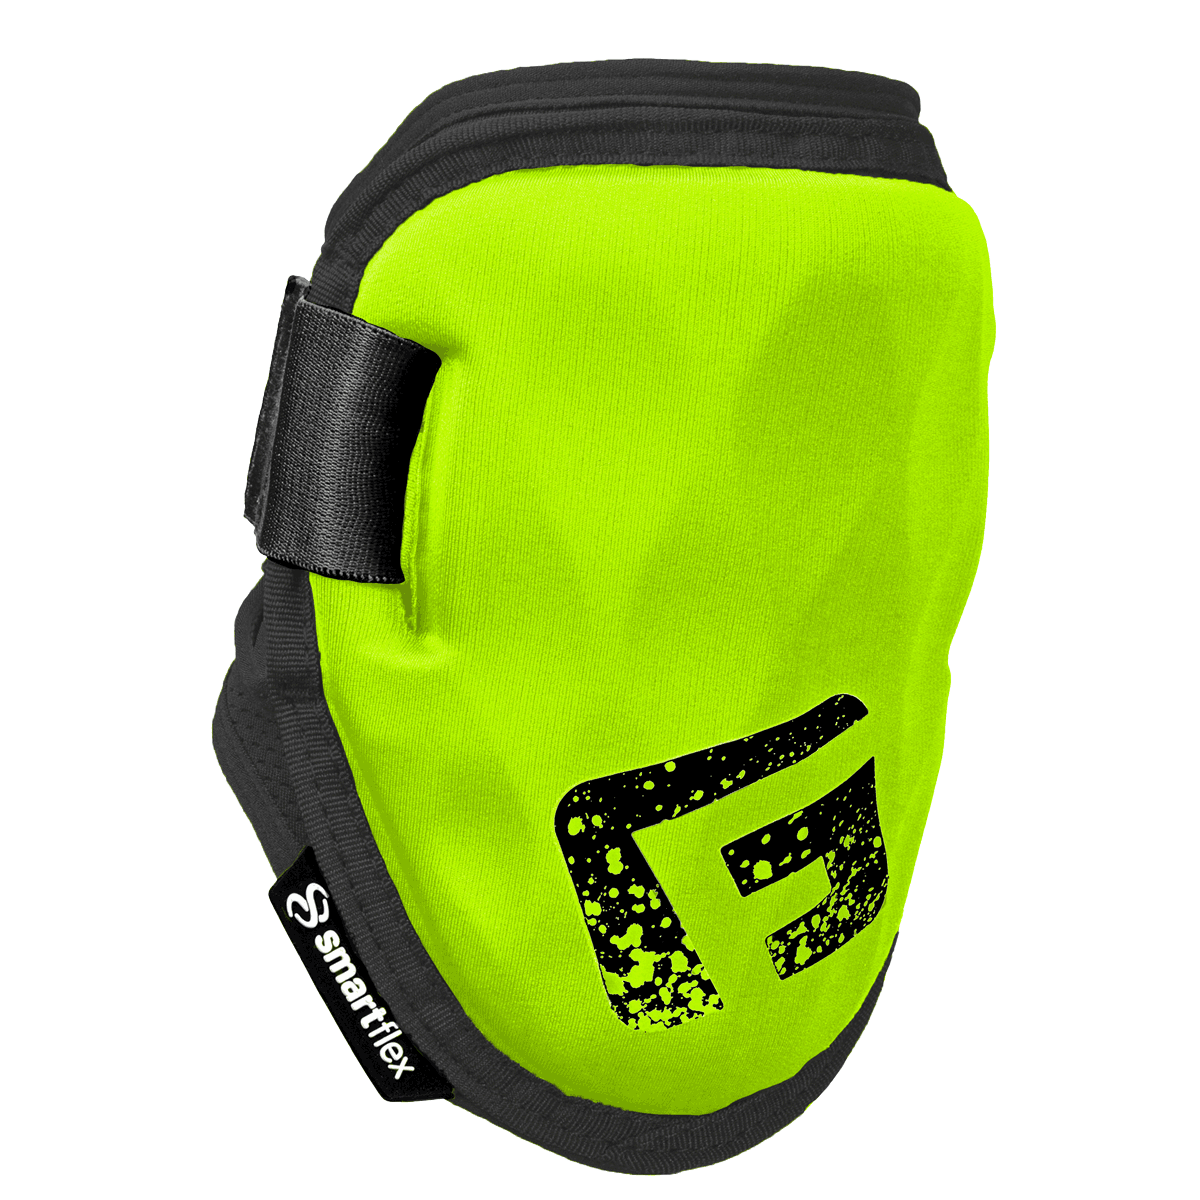 Shockwave Fastpitch Elbow Guard - Limited Edition